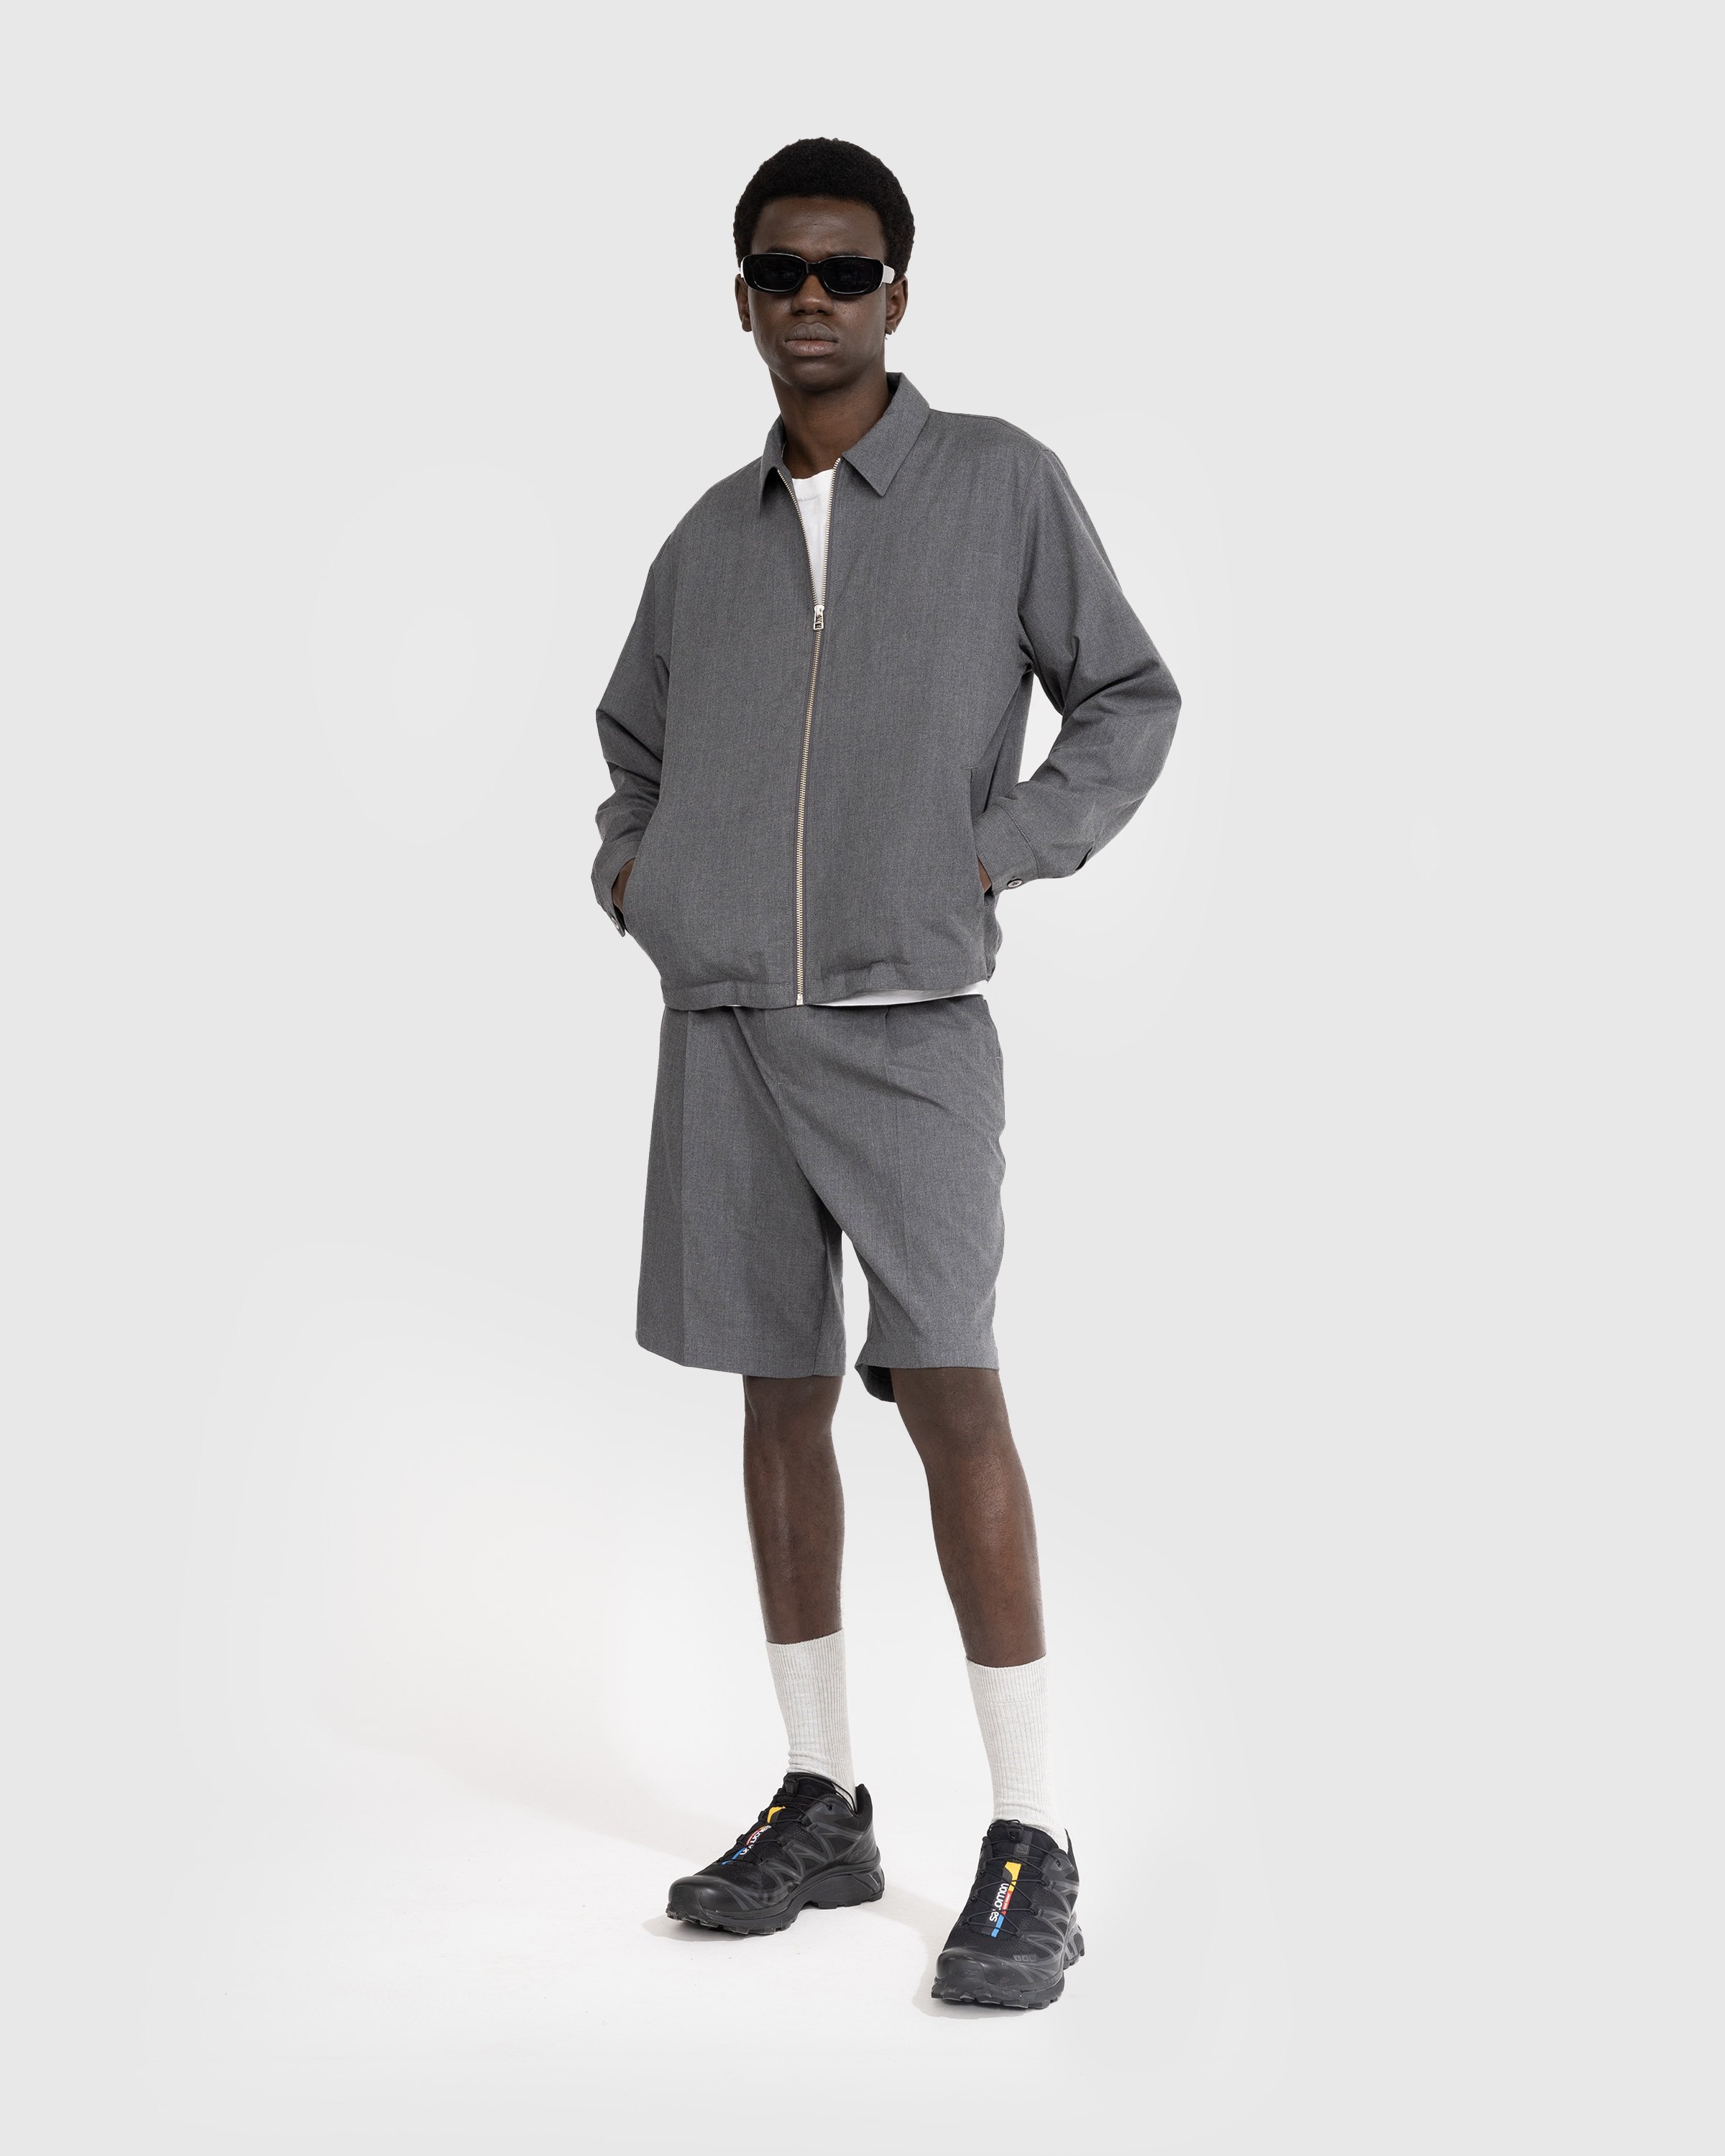 Highsnobiety HS05 - Tropical Suiting Jacket - Clothing - Grey - Image 6